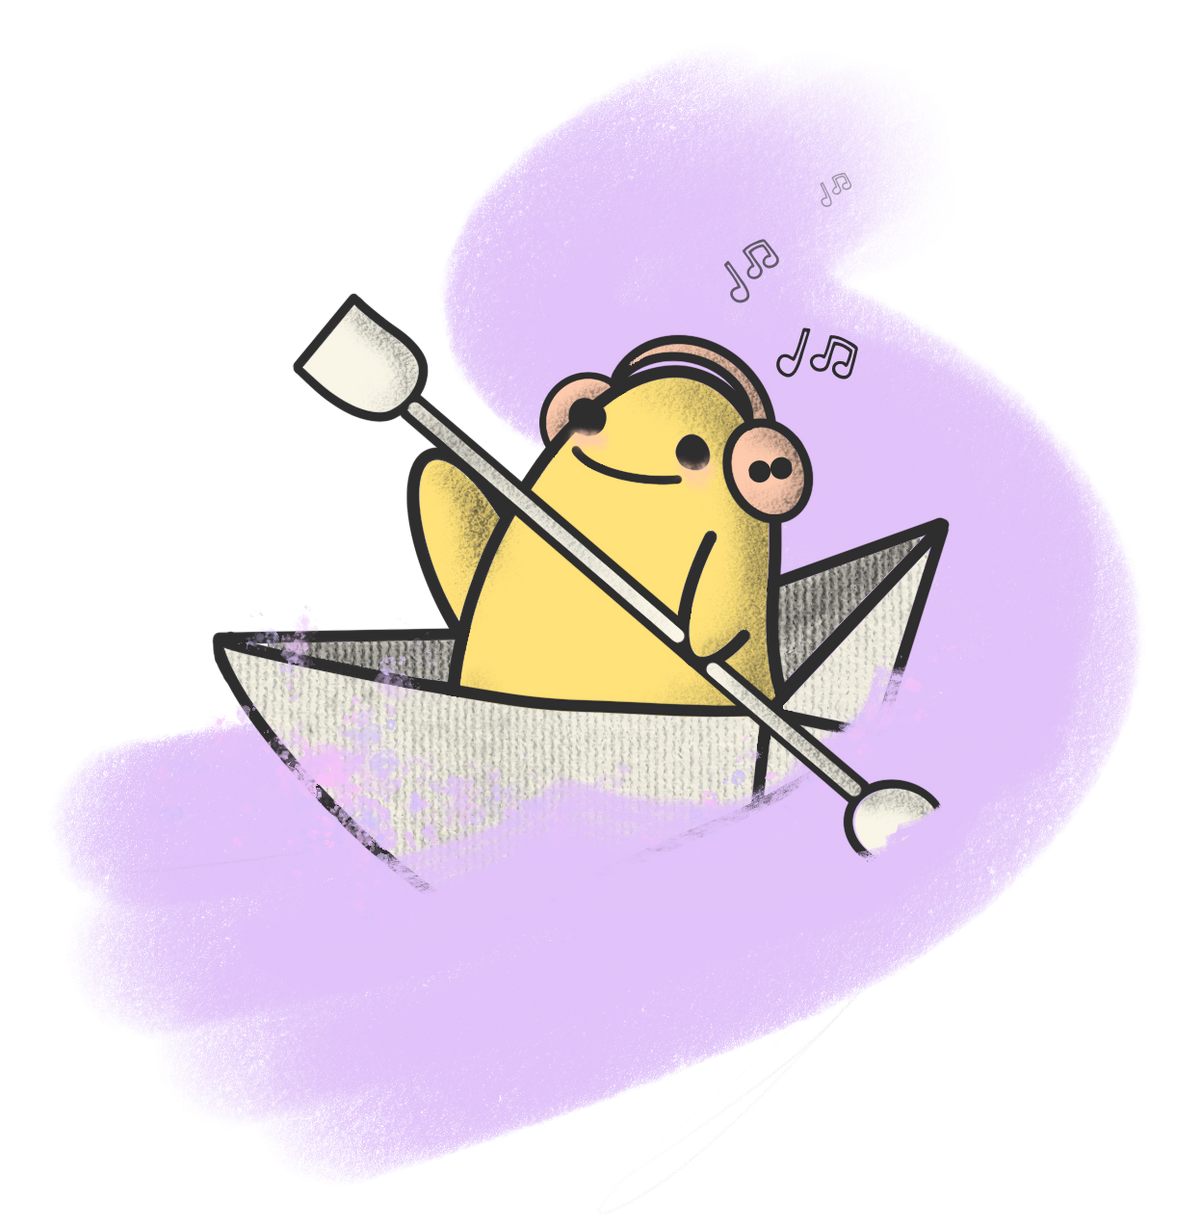 alt="Blob character in a paper boat streaming music while paddling down a purple river." 